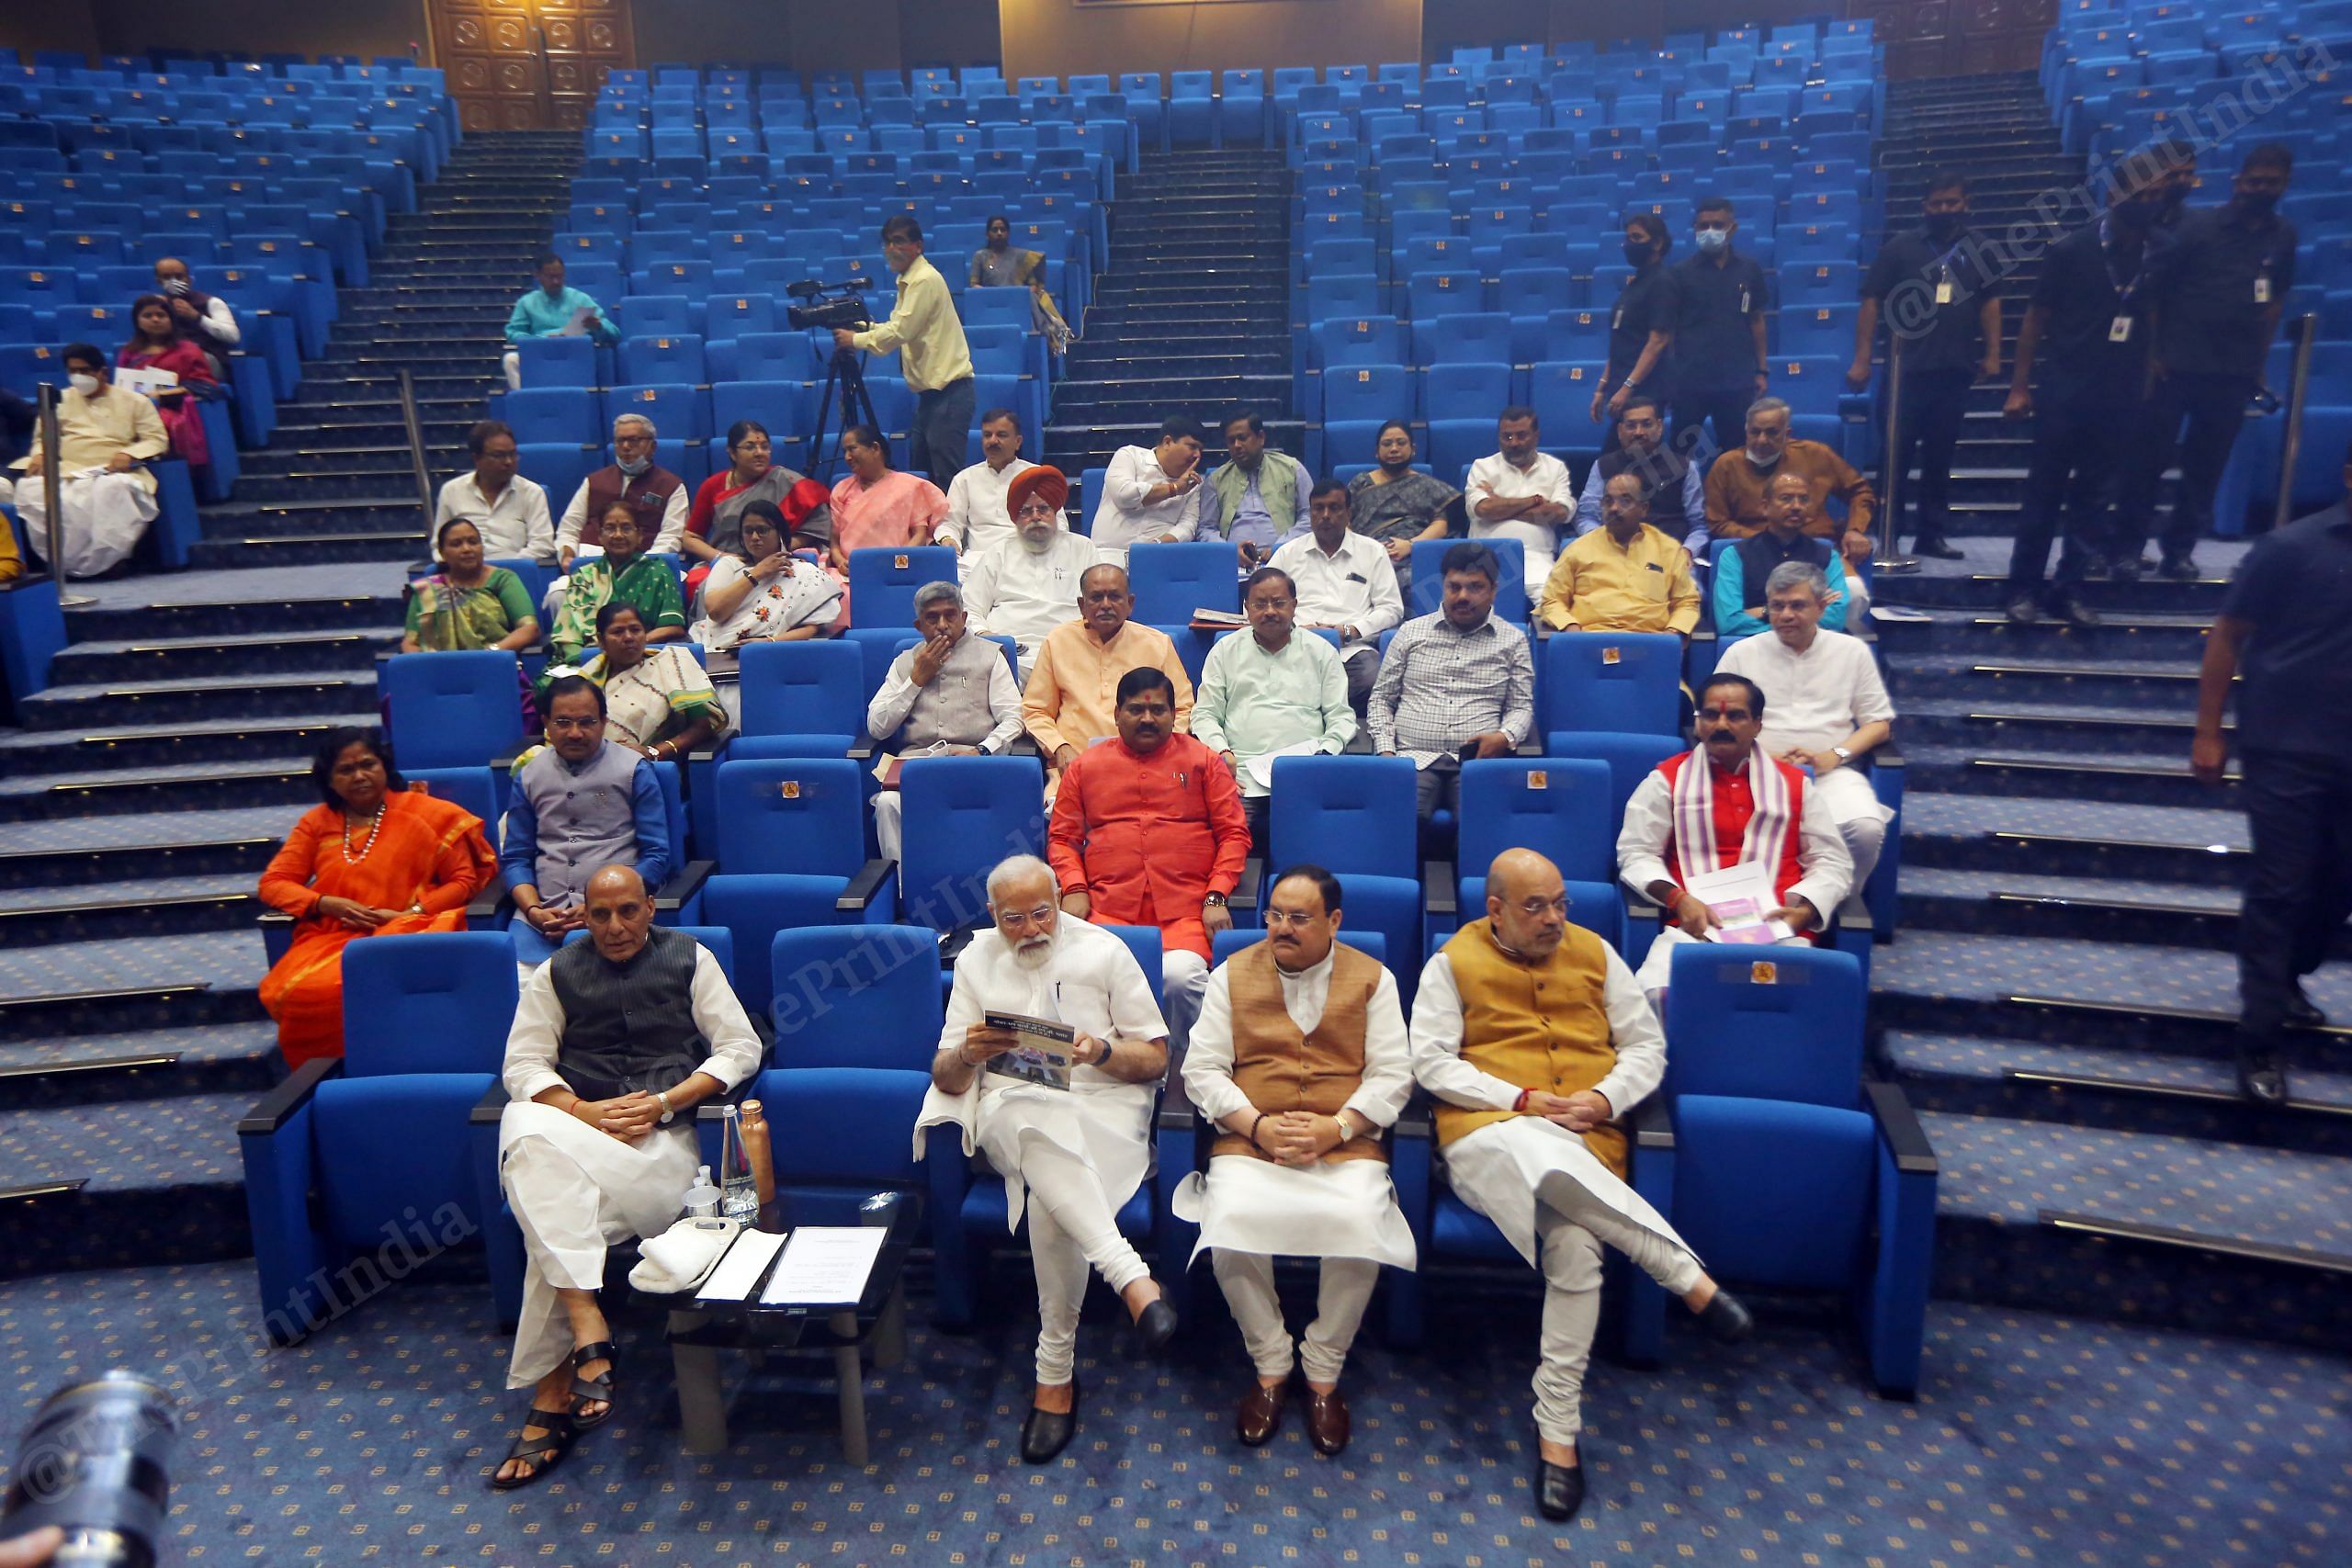 PM Narendra Modi, BJP President J.P. Nadda, Defence Minister Rajnath Singh, and Home Minister Amit Shah sitting with Party MP's during the parliamentary party meeting at Ambedkar Bhavan | Photo: Praveen Jain | ThePrint